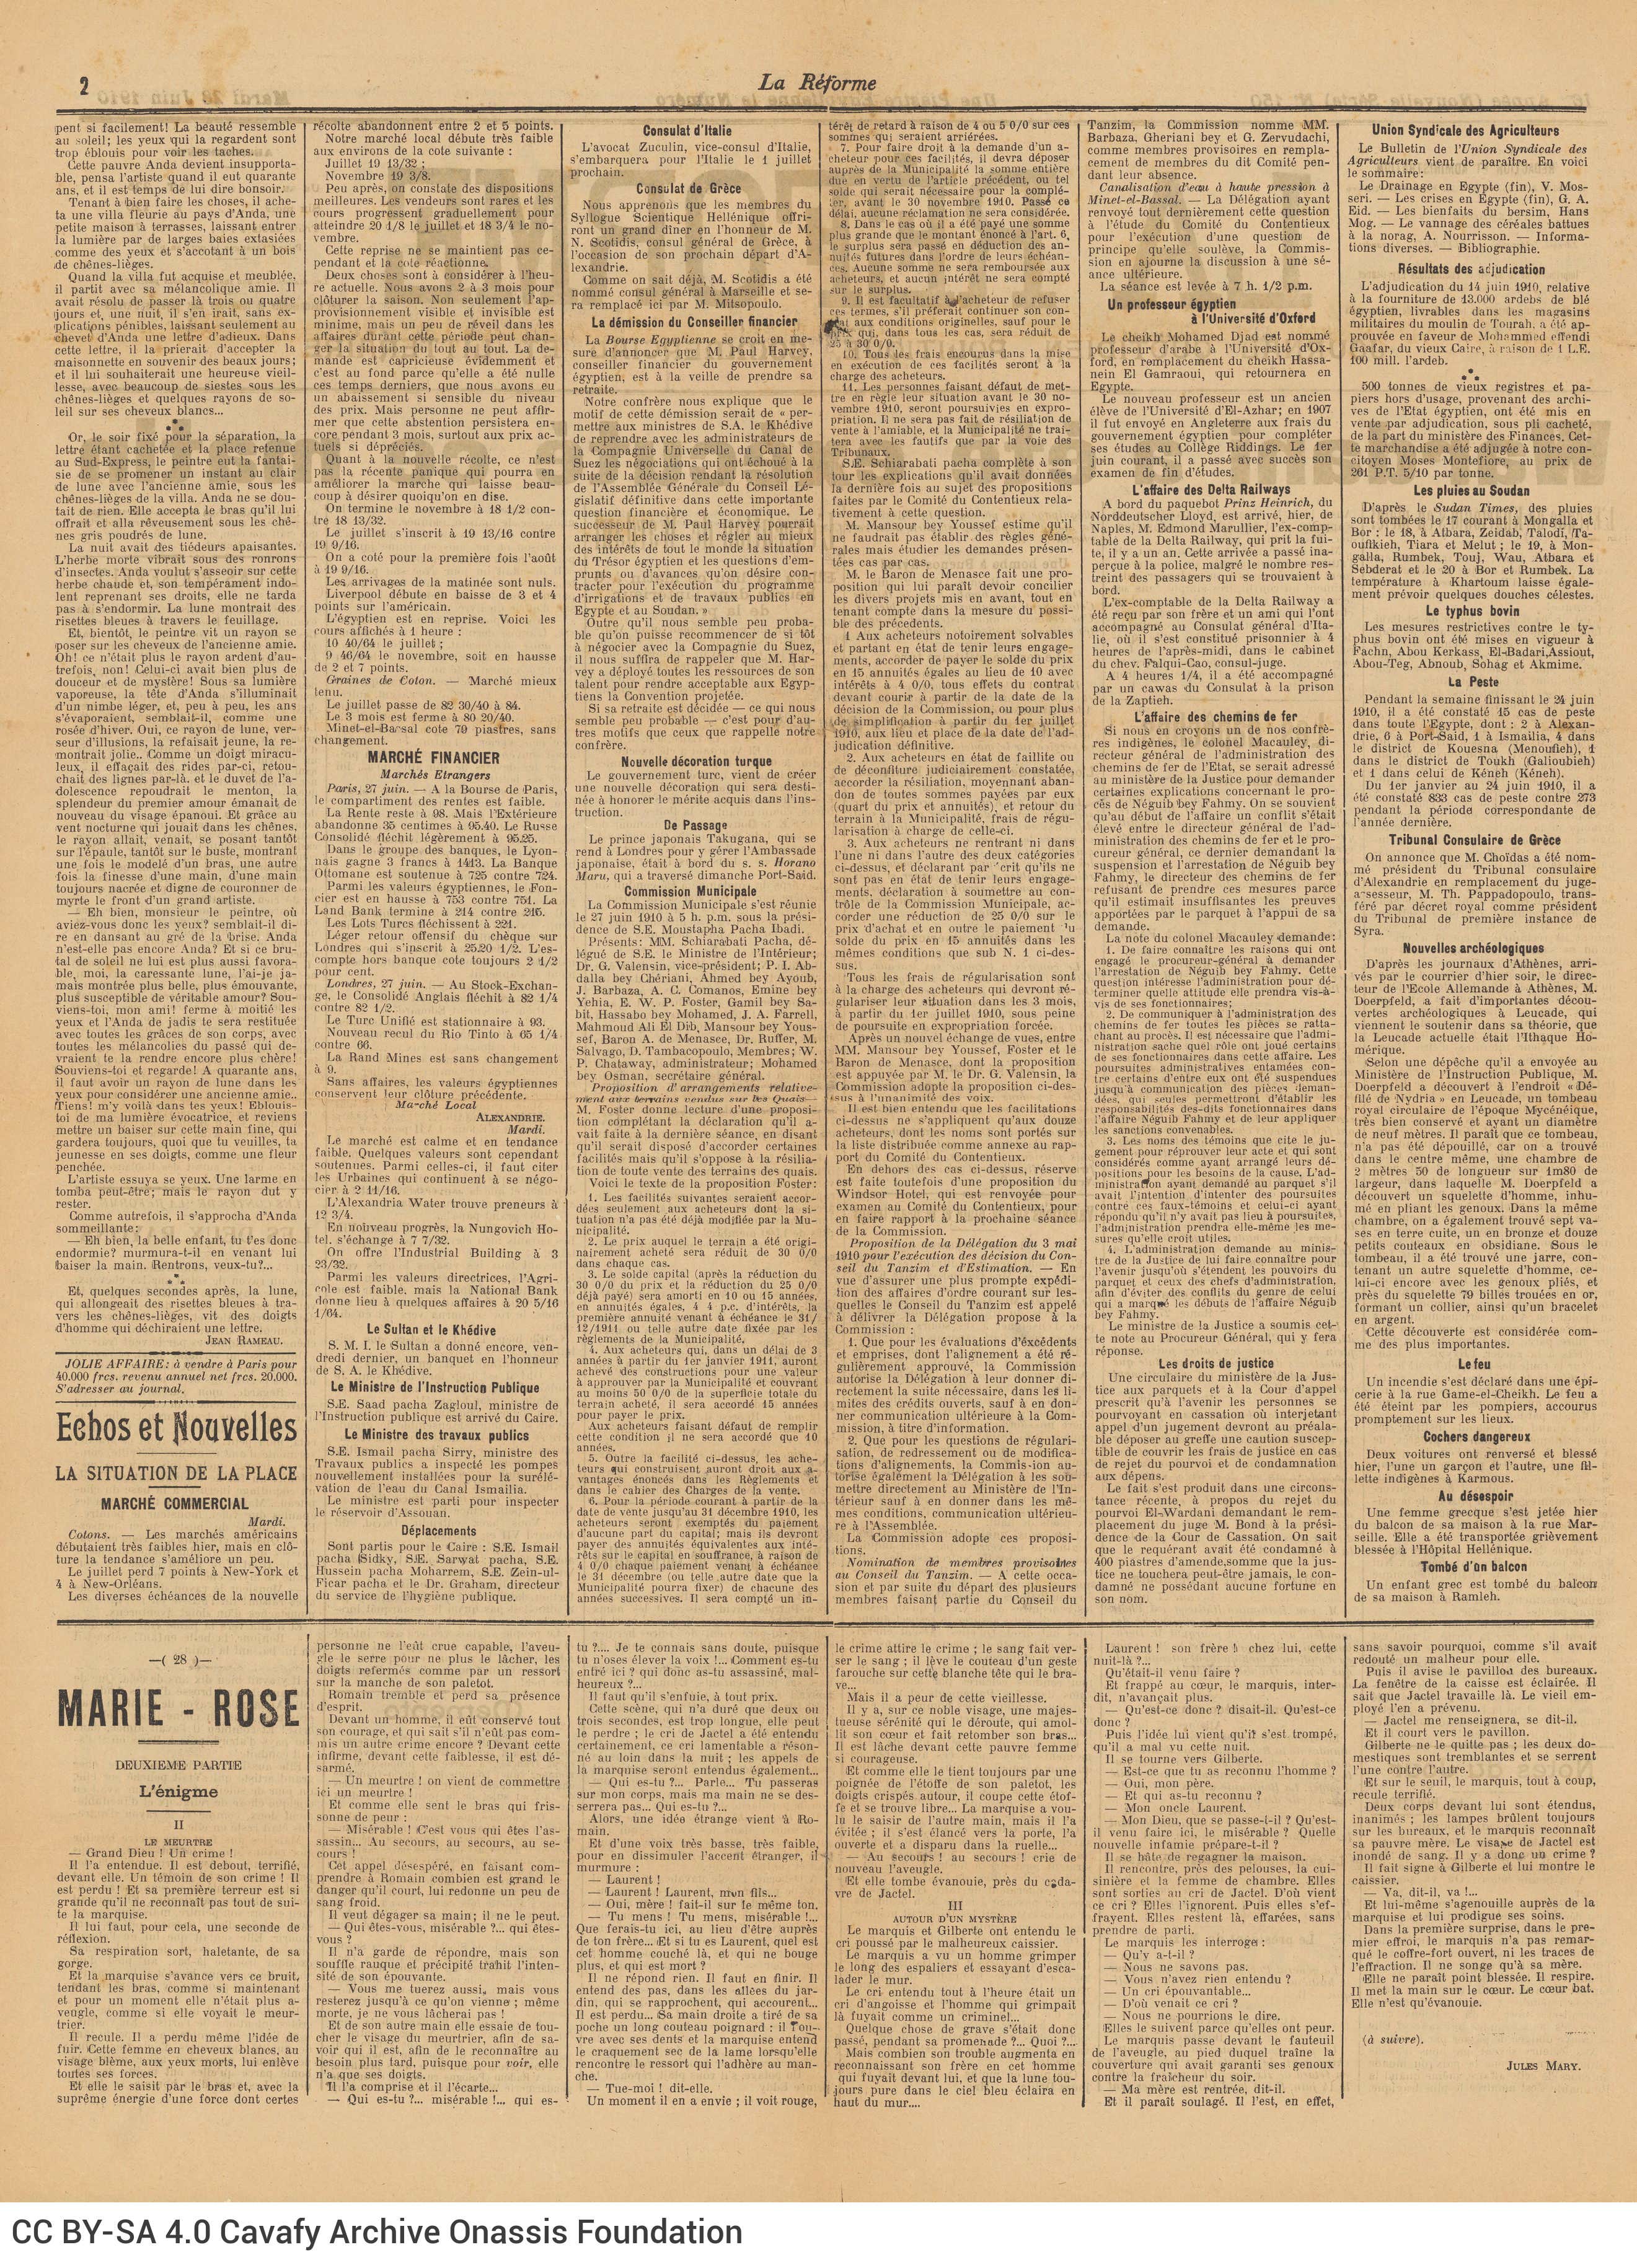 Ten issues of the French-language newspaper *La Réforme* of Alexandria (one of the issues is double). Only the first two pag